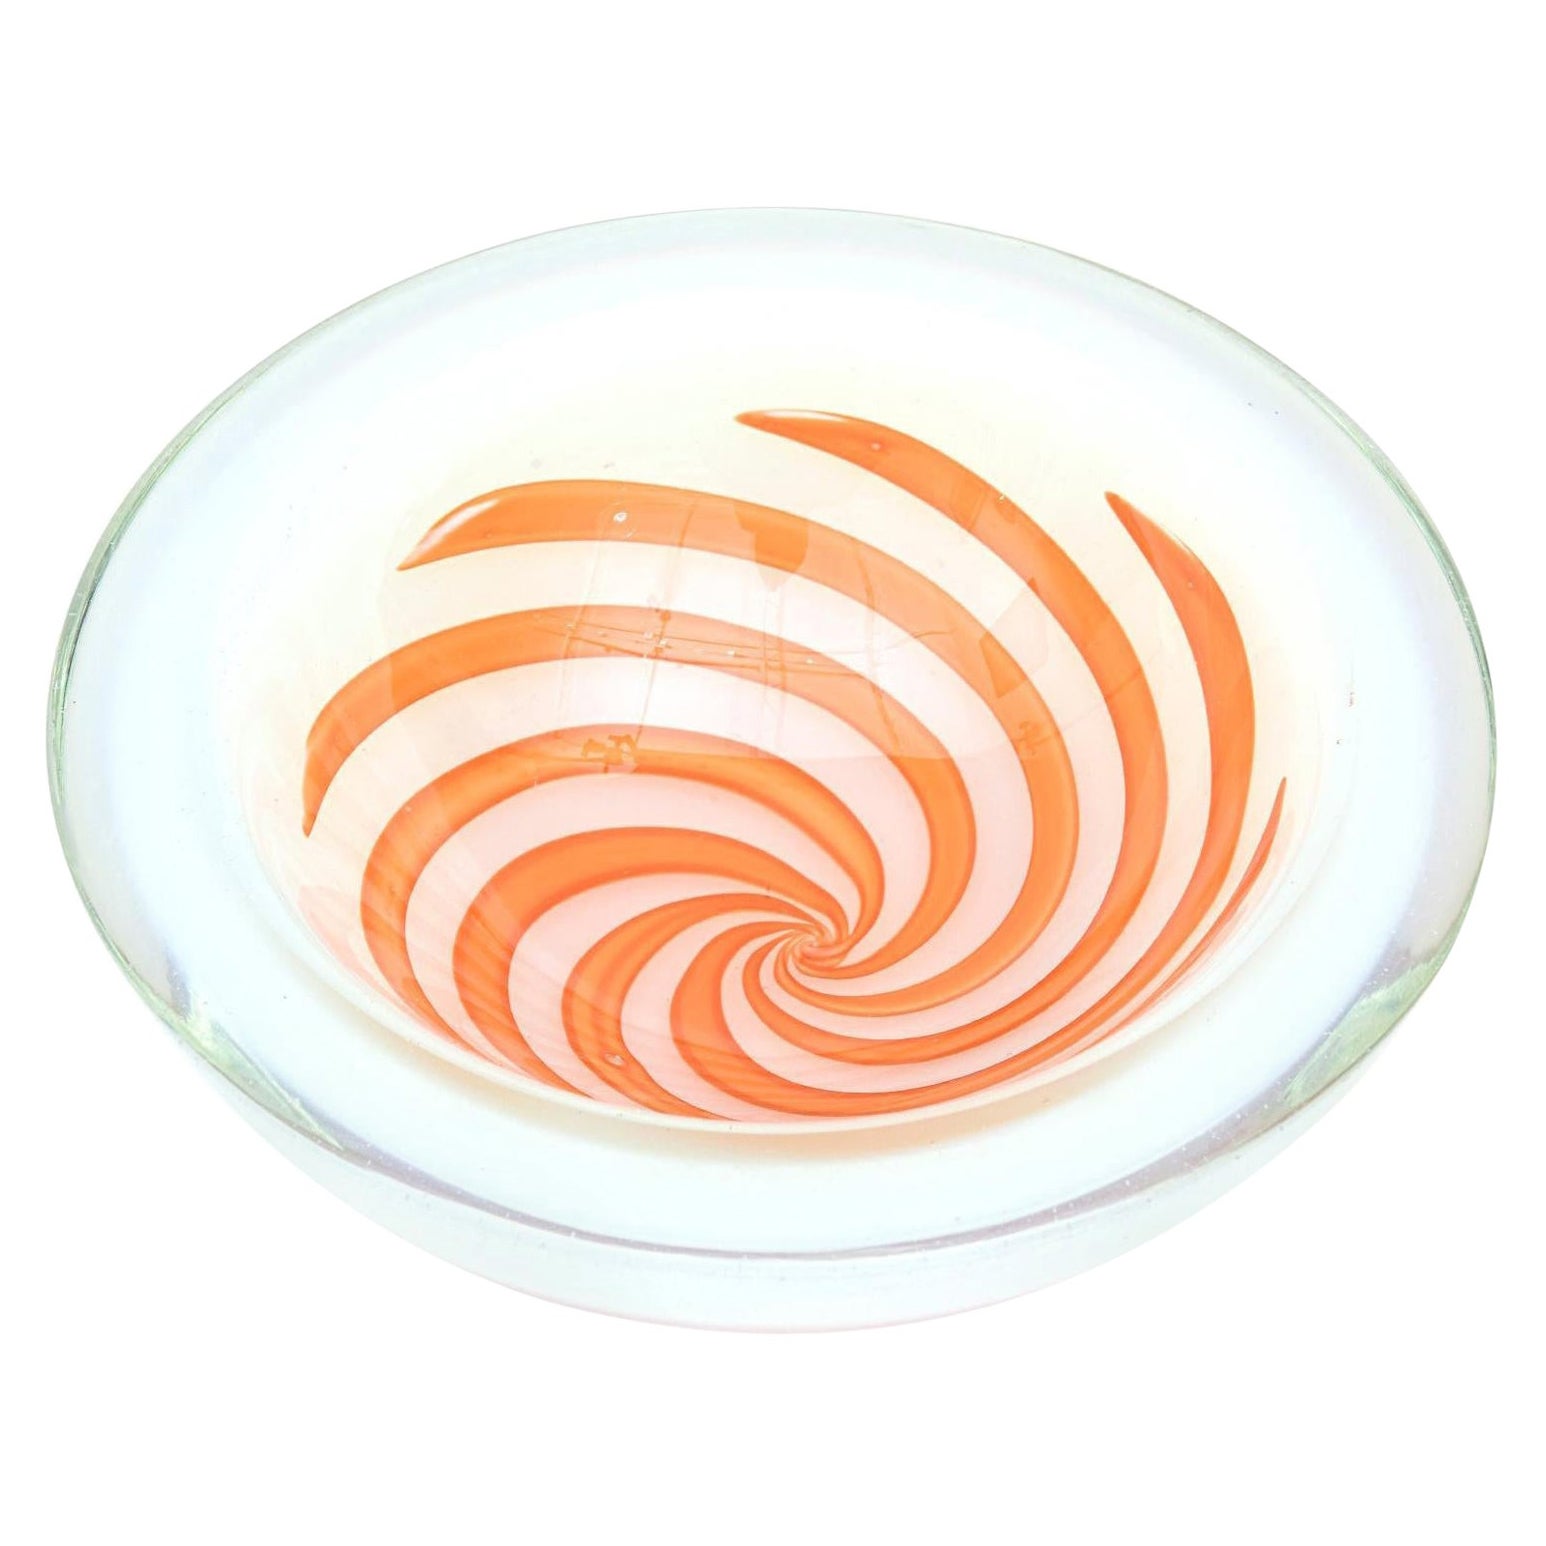 Vintage Murano Fratelli Toso Opalescent Glass Bowl with Orange Optic Swirls